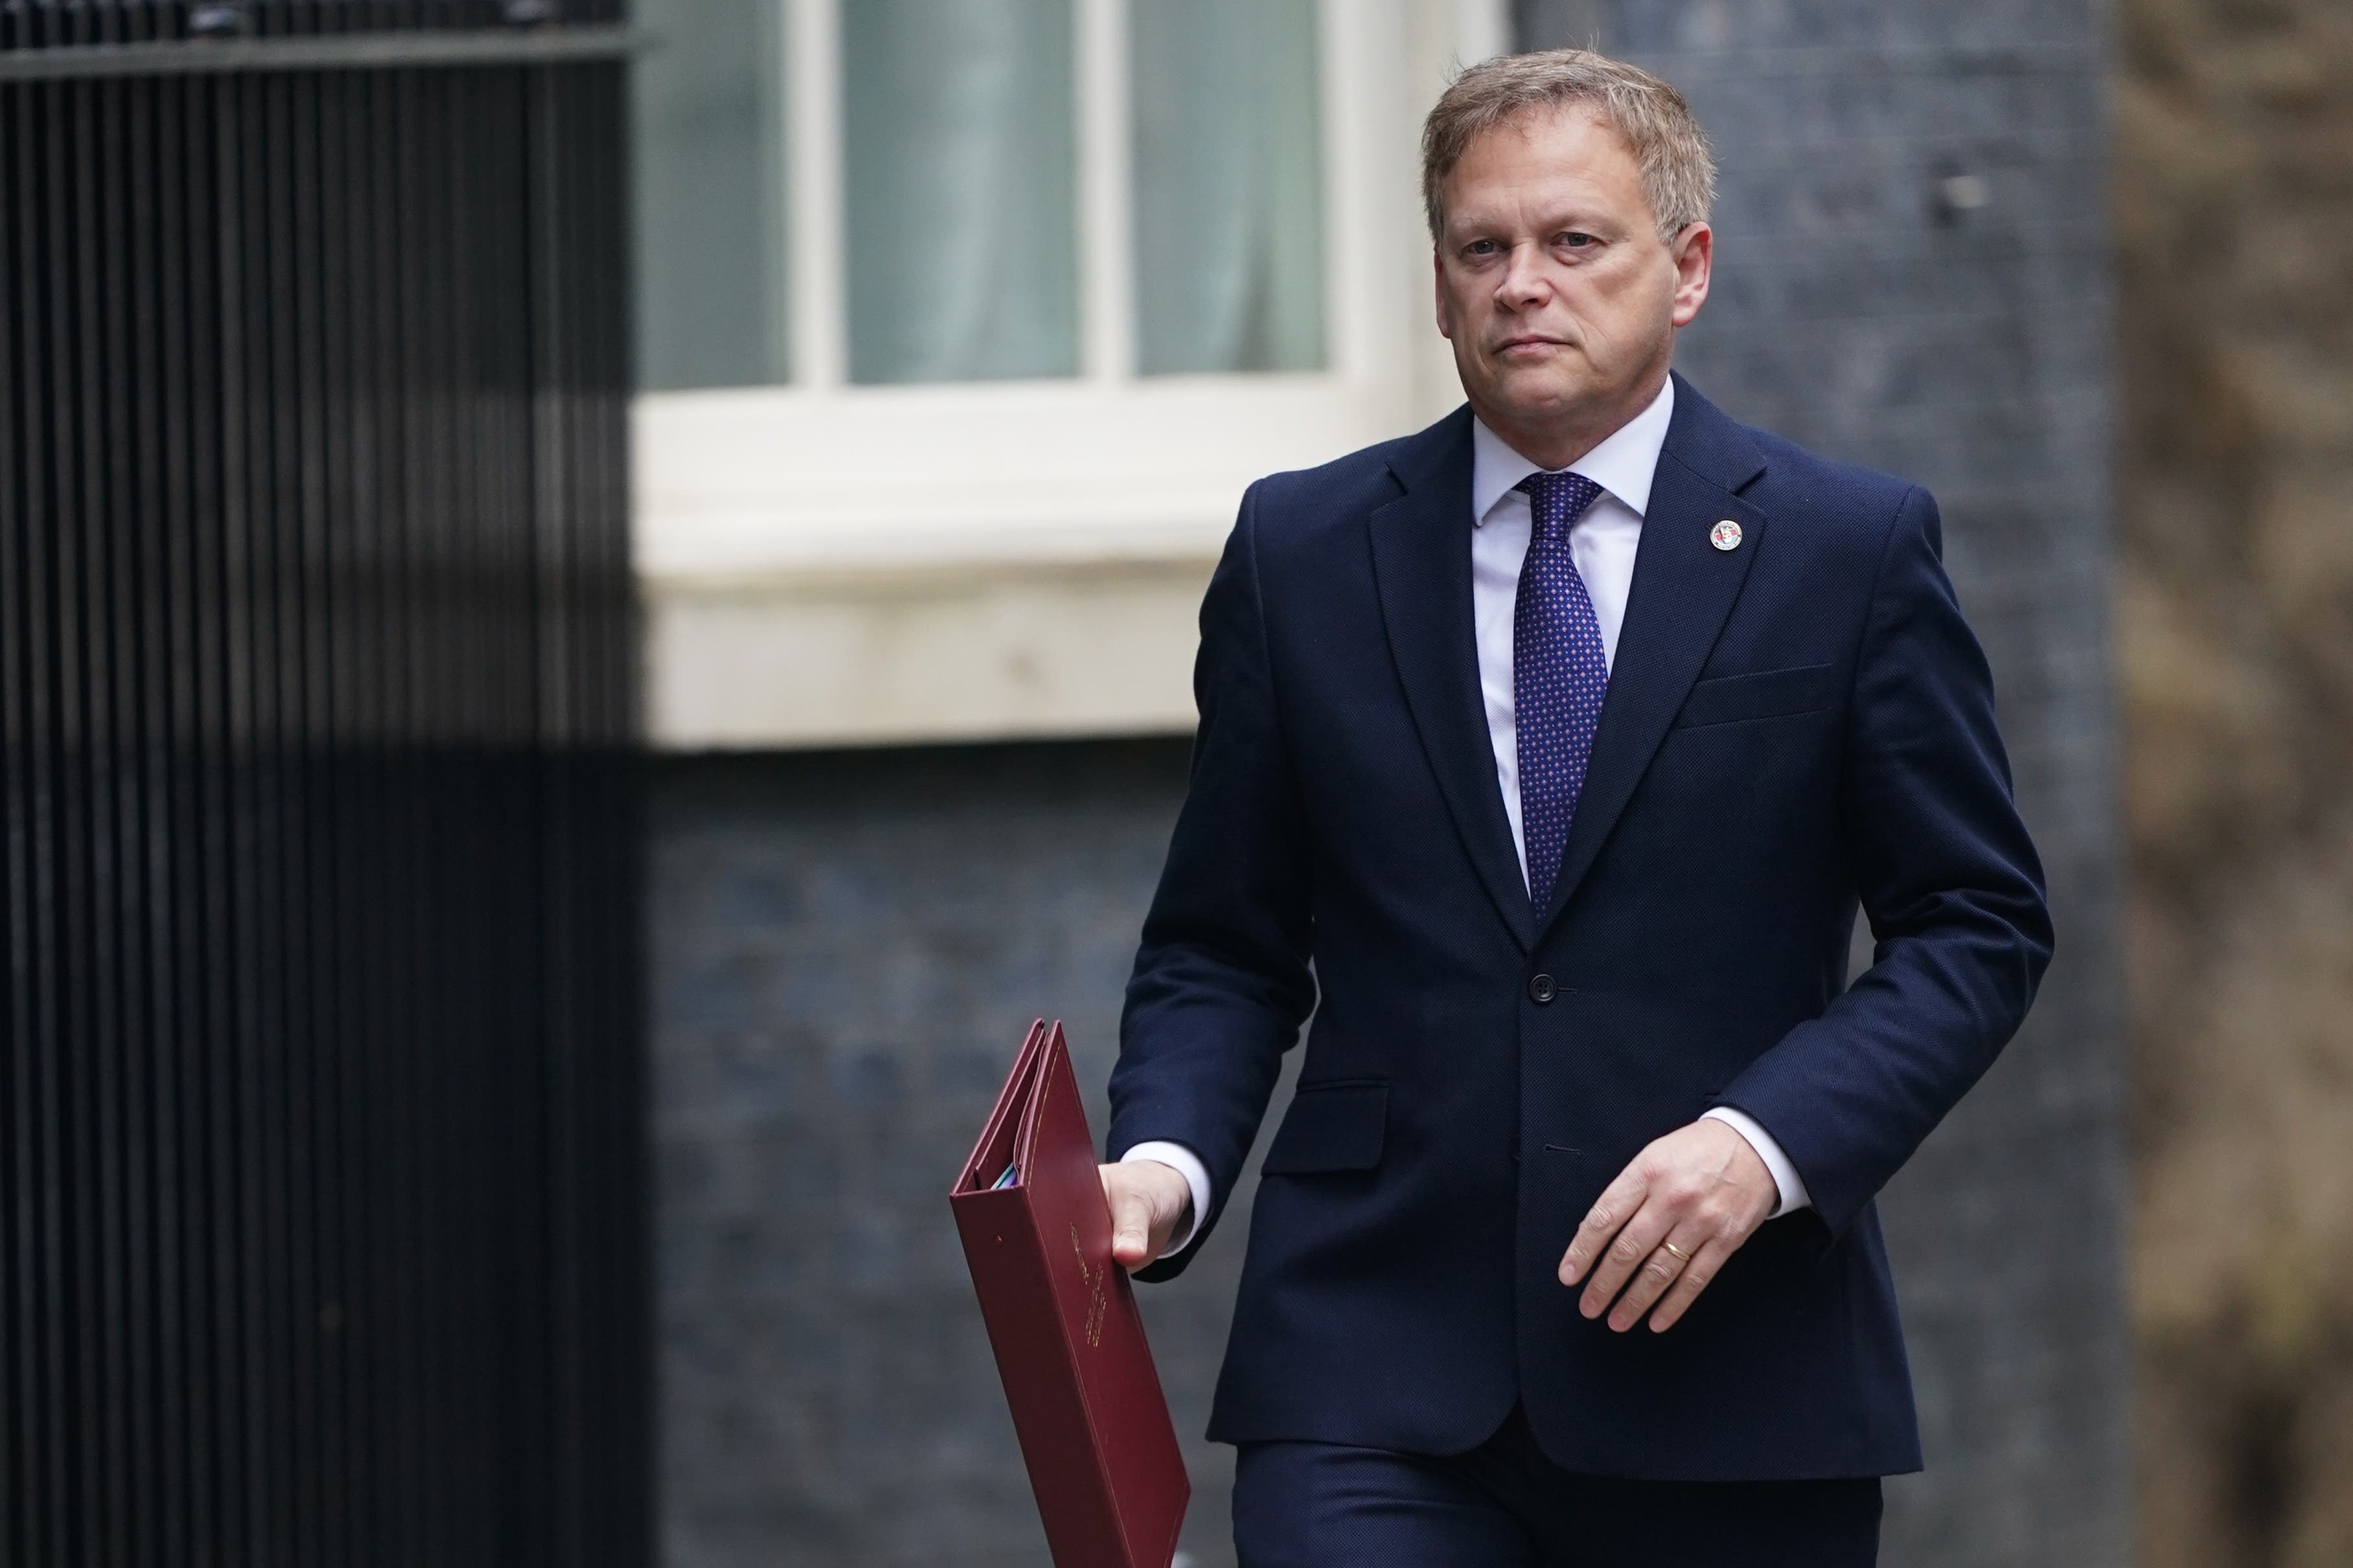 Defence secretary Grant Shapps tried to deflect questions about Mr Menzies’s suspension, asking to talk about the ‘two wars going on in the world’ instead